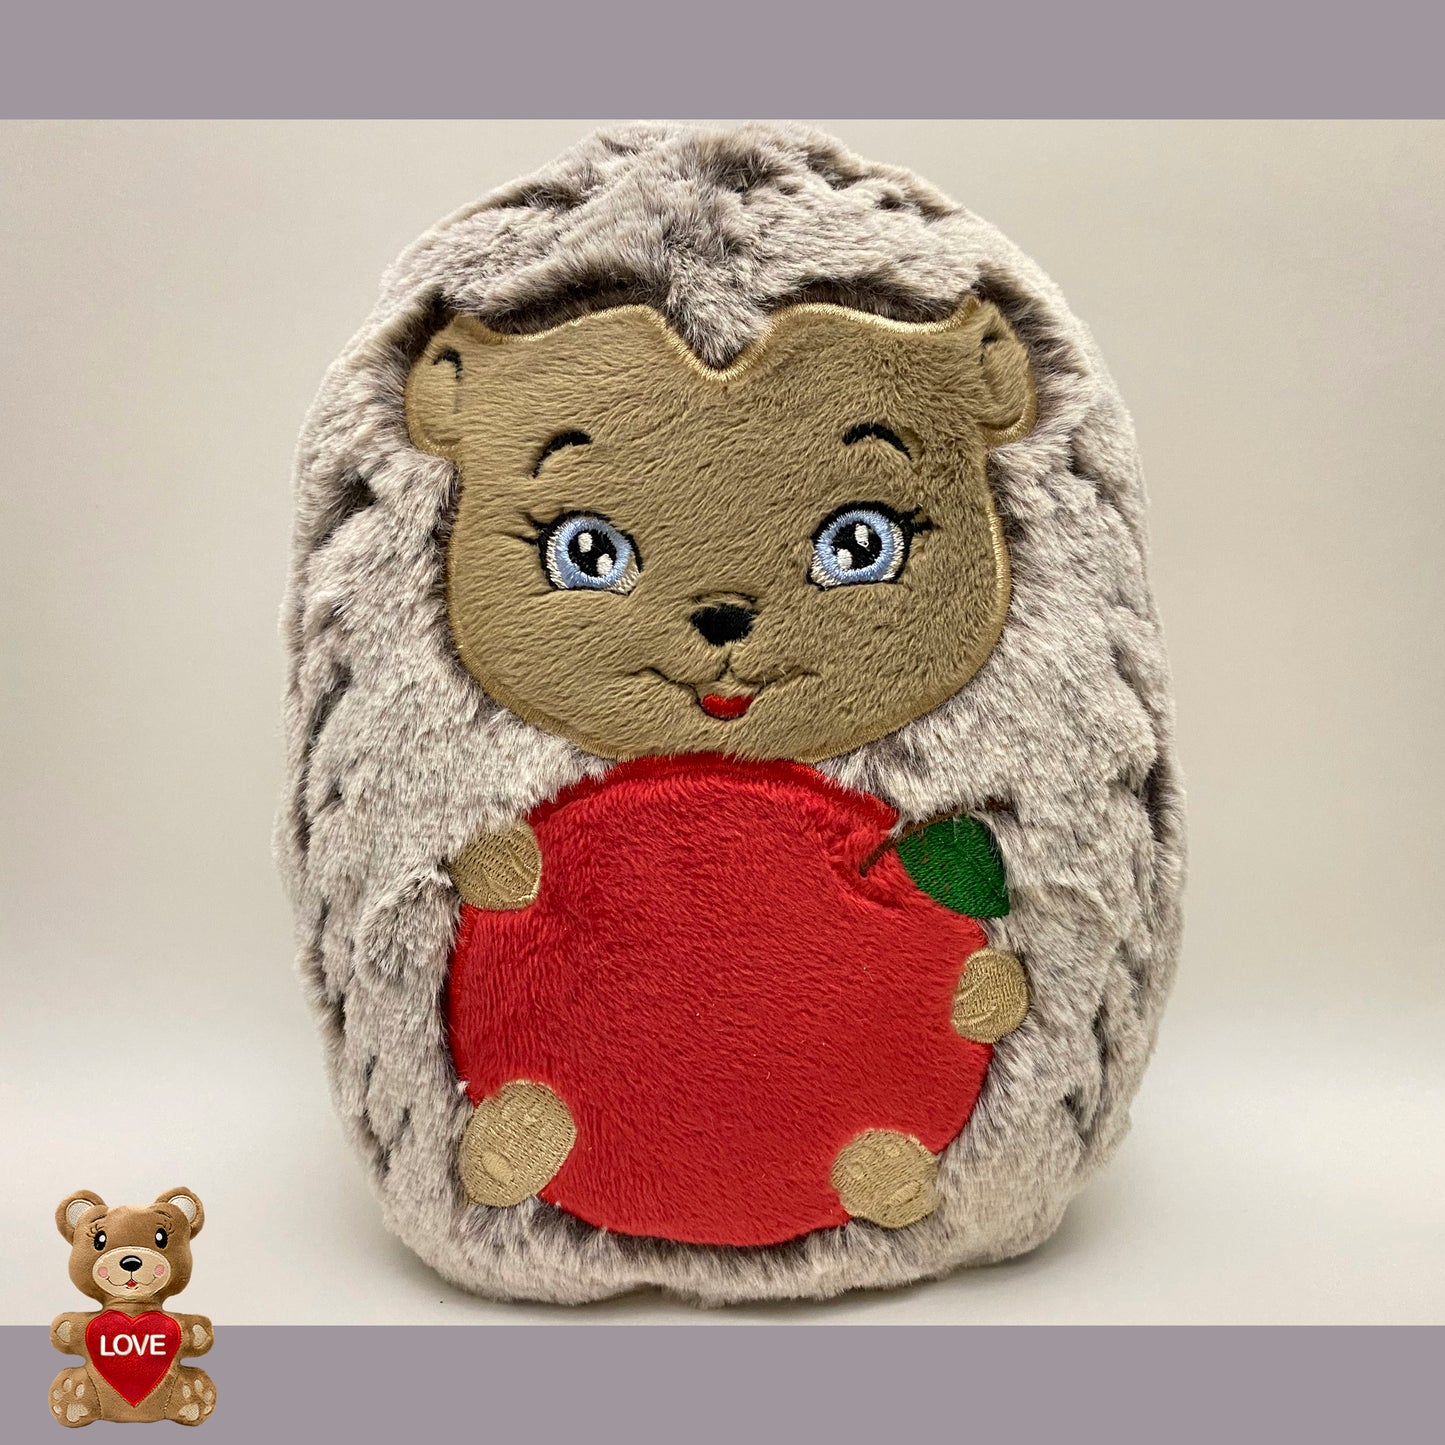 Personalised Cute Hedgehog Stuffed toy ,Super cute personalised soft plush toy, Personalised Gift, Unique Personalized Birthday Gifts , Custom Gifts For Children